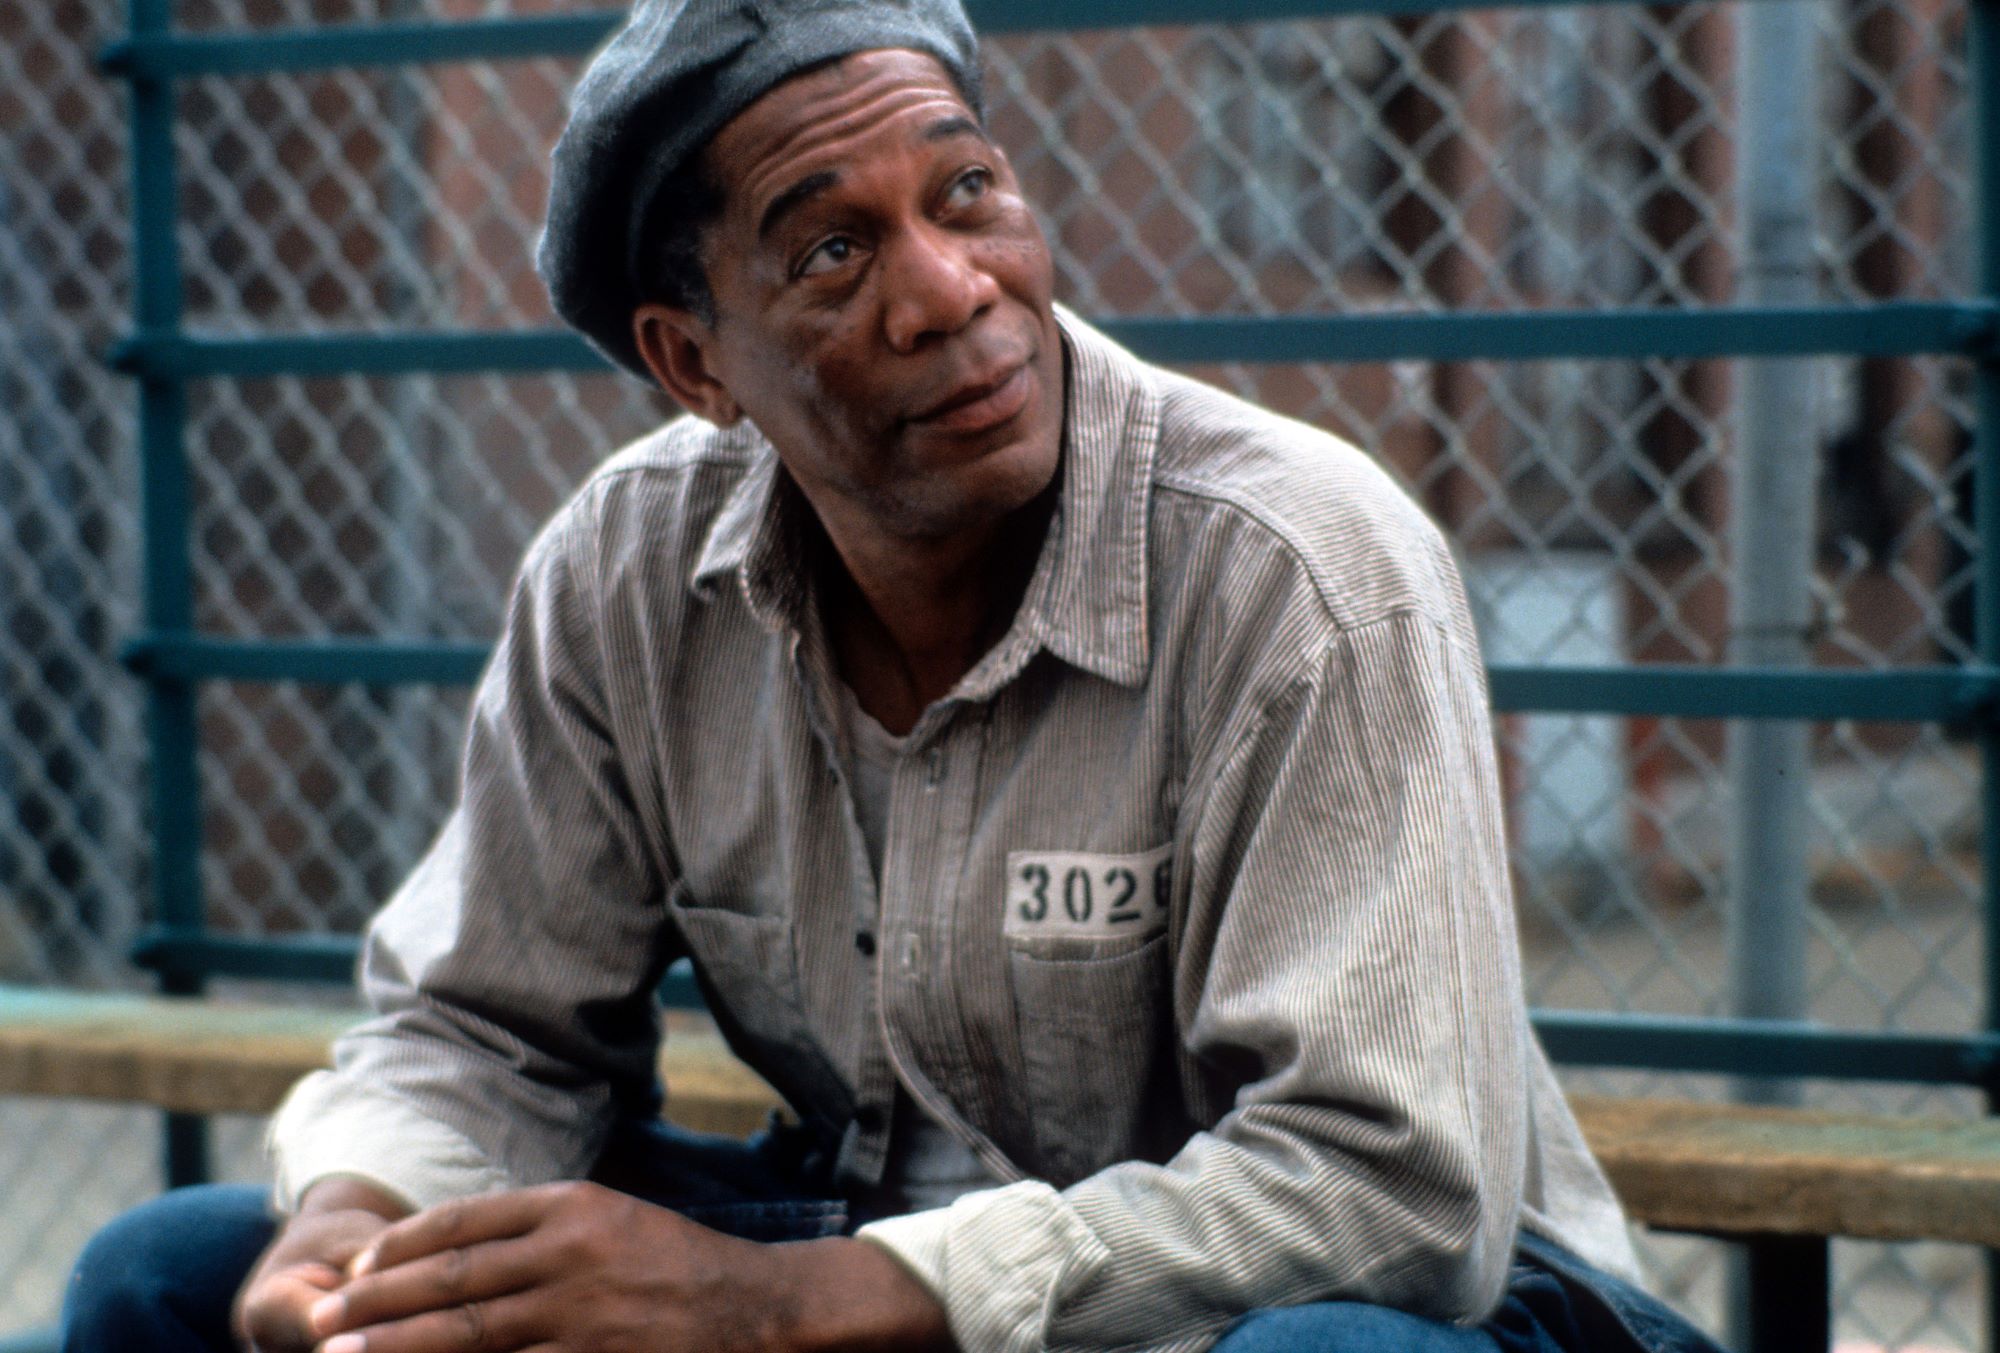 Morgan Freeman in a scene from 'The Shawshank Redemption' sitting in his prison uniform and hat on top of a picnic table outside in the yard.